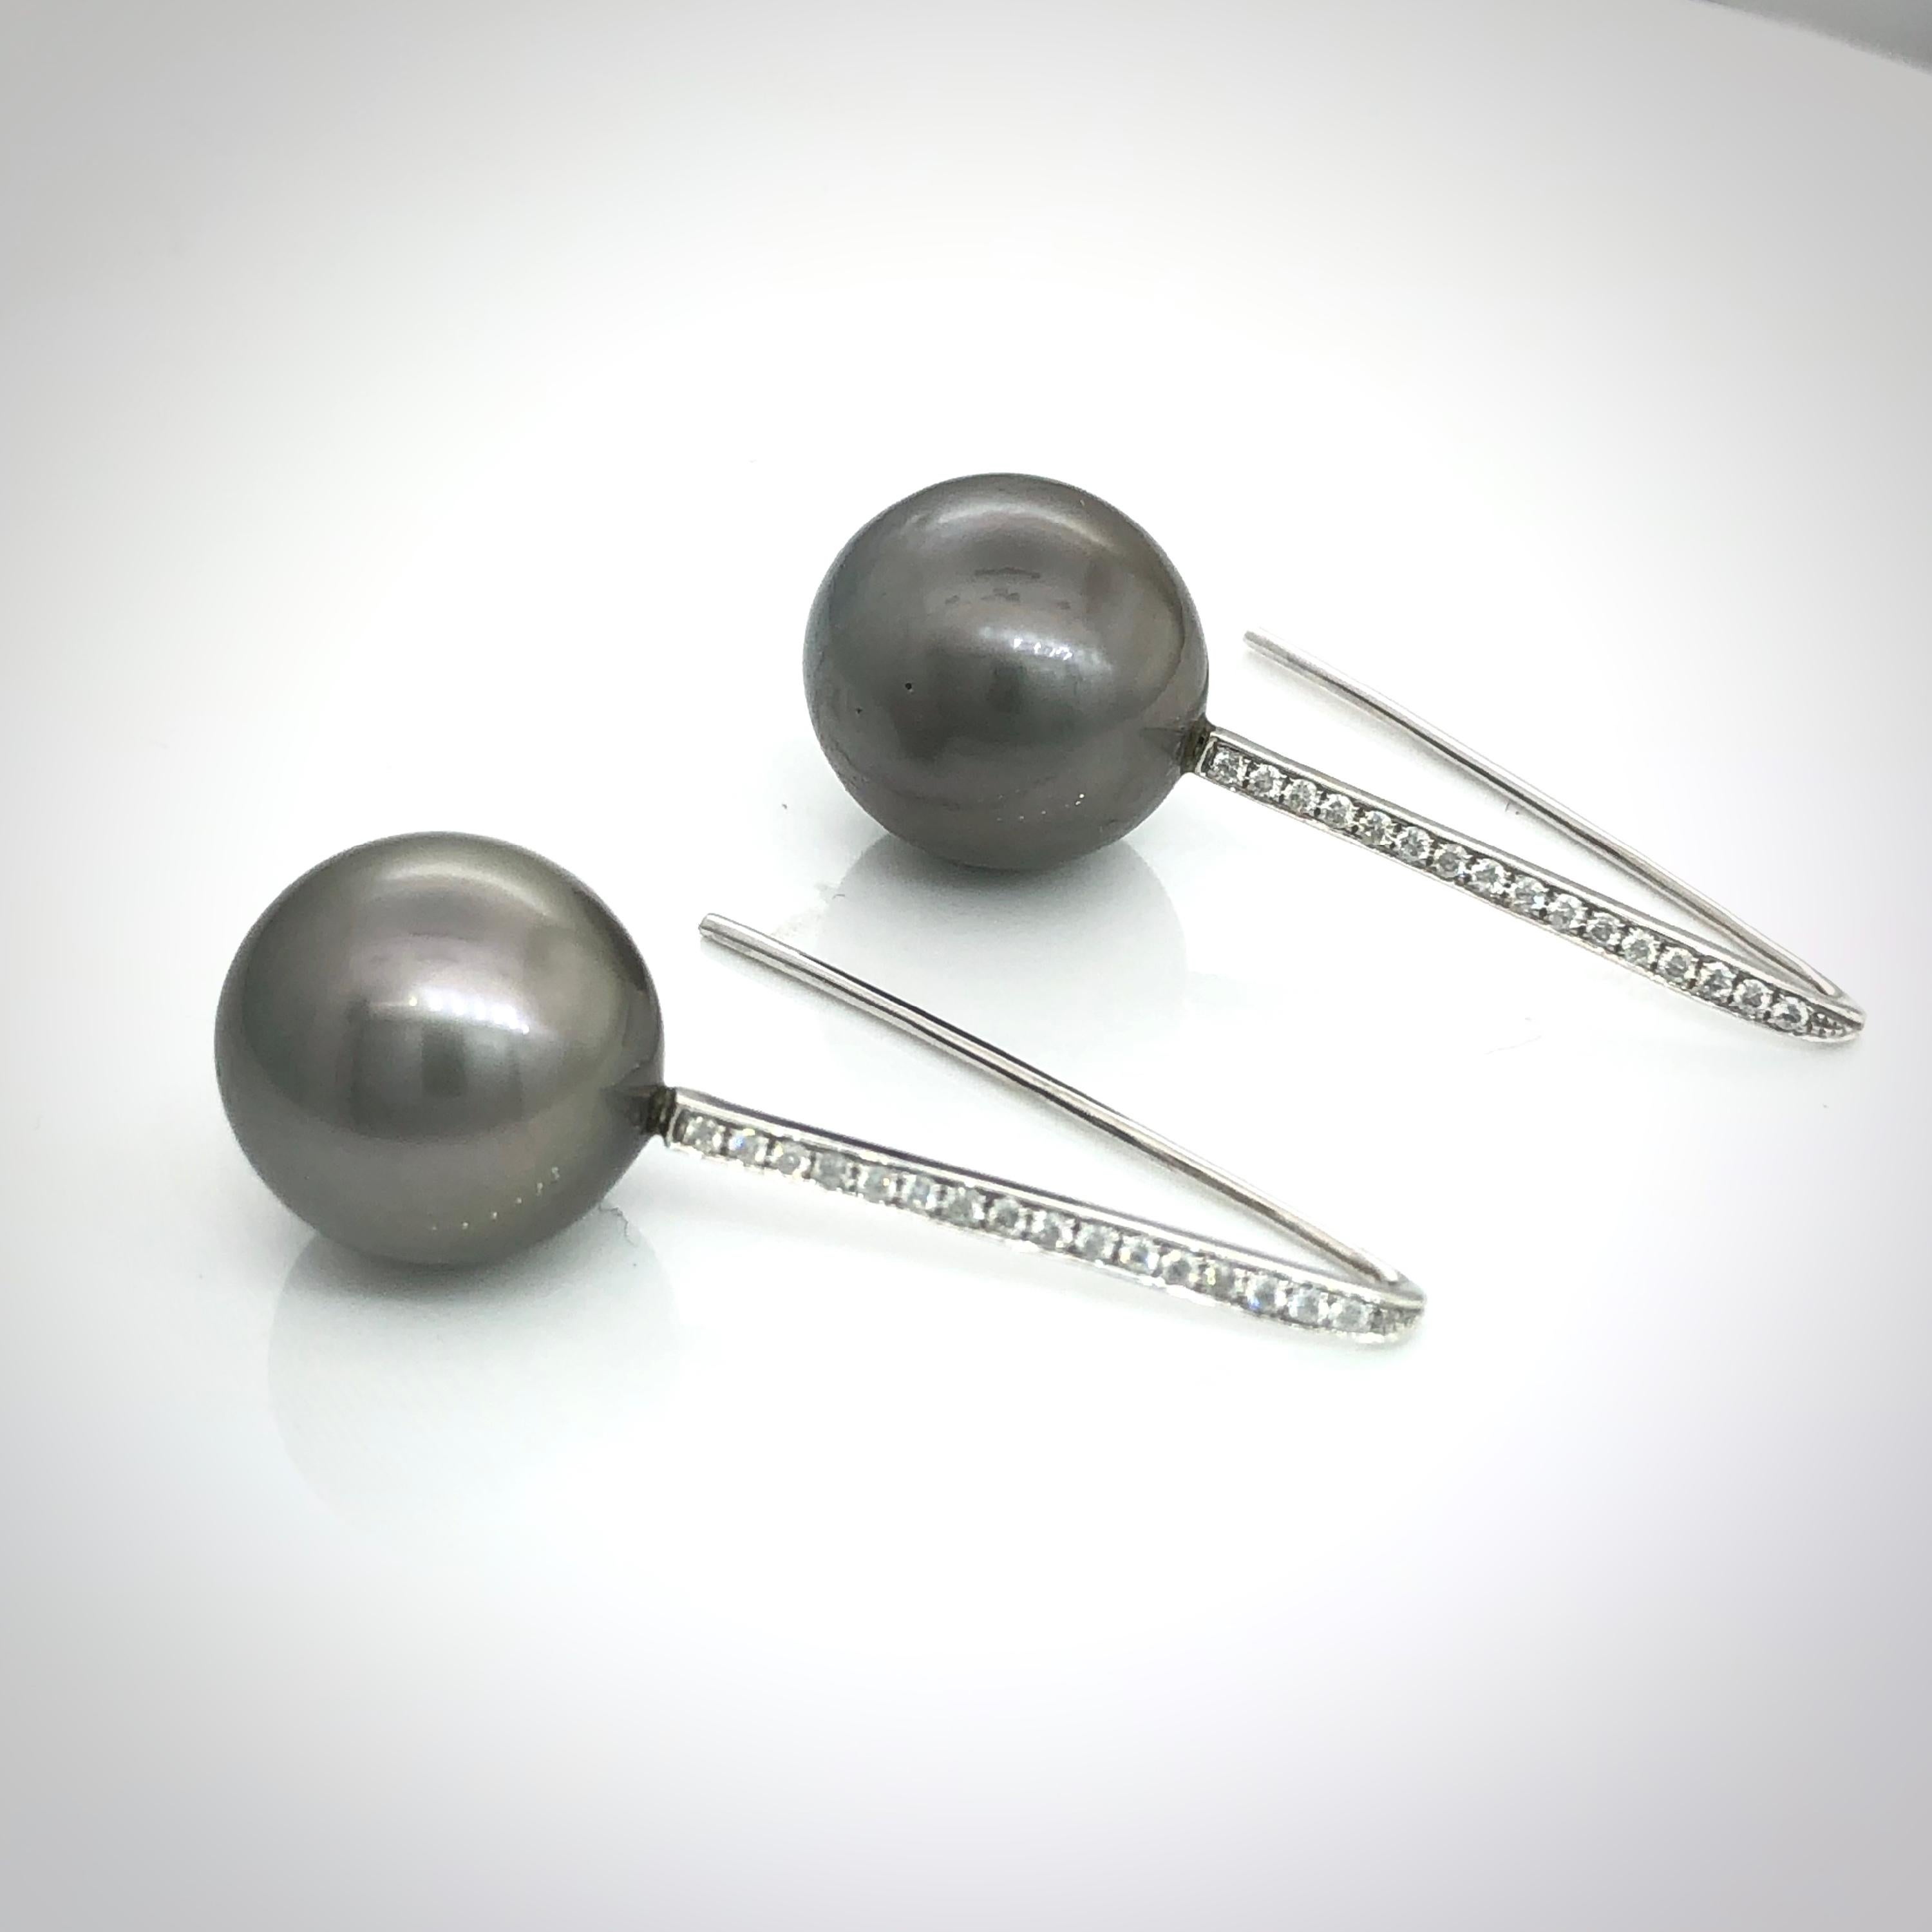 Hand made hanging  earrings in 18 carat white gold with long strait hook
Pave set with 32 brilliant cut round diamonds, totalling 0.2 carats
Round Tahitian pearls 13 mm in diameter
Weight of the earrings is 7.3 grams
Drop lenghts is 35 mm
